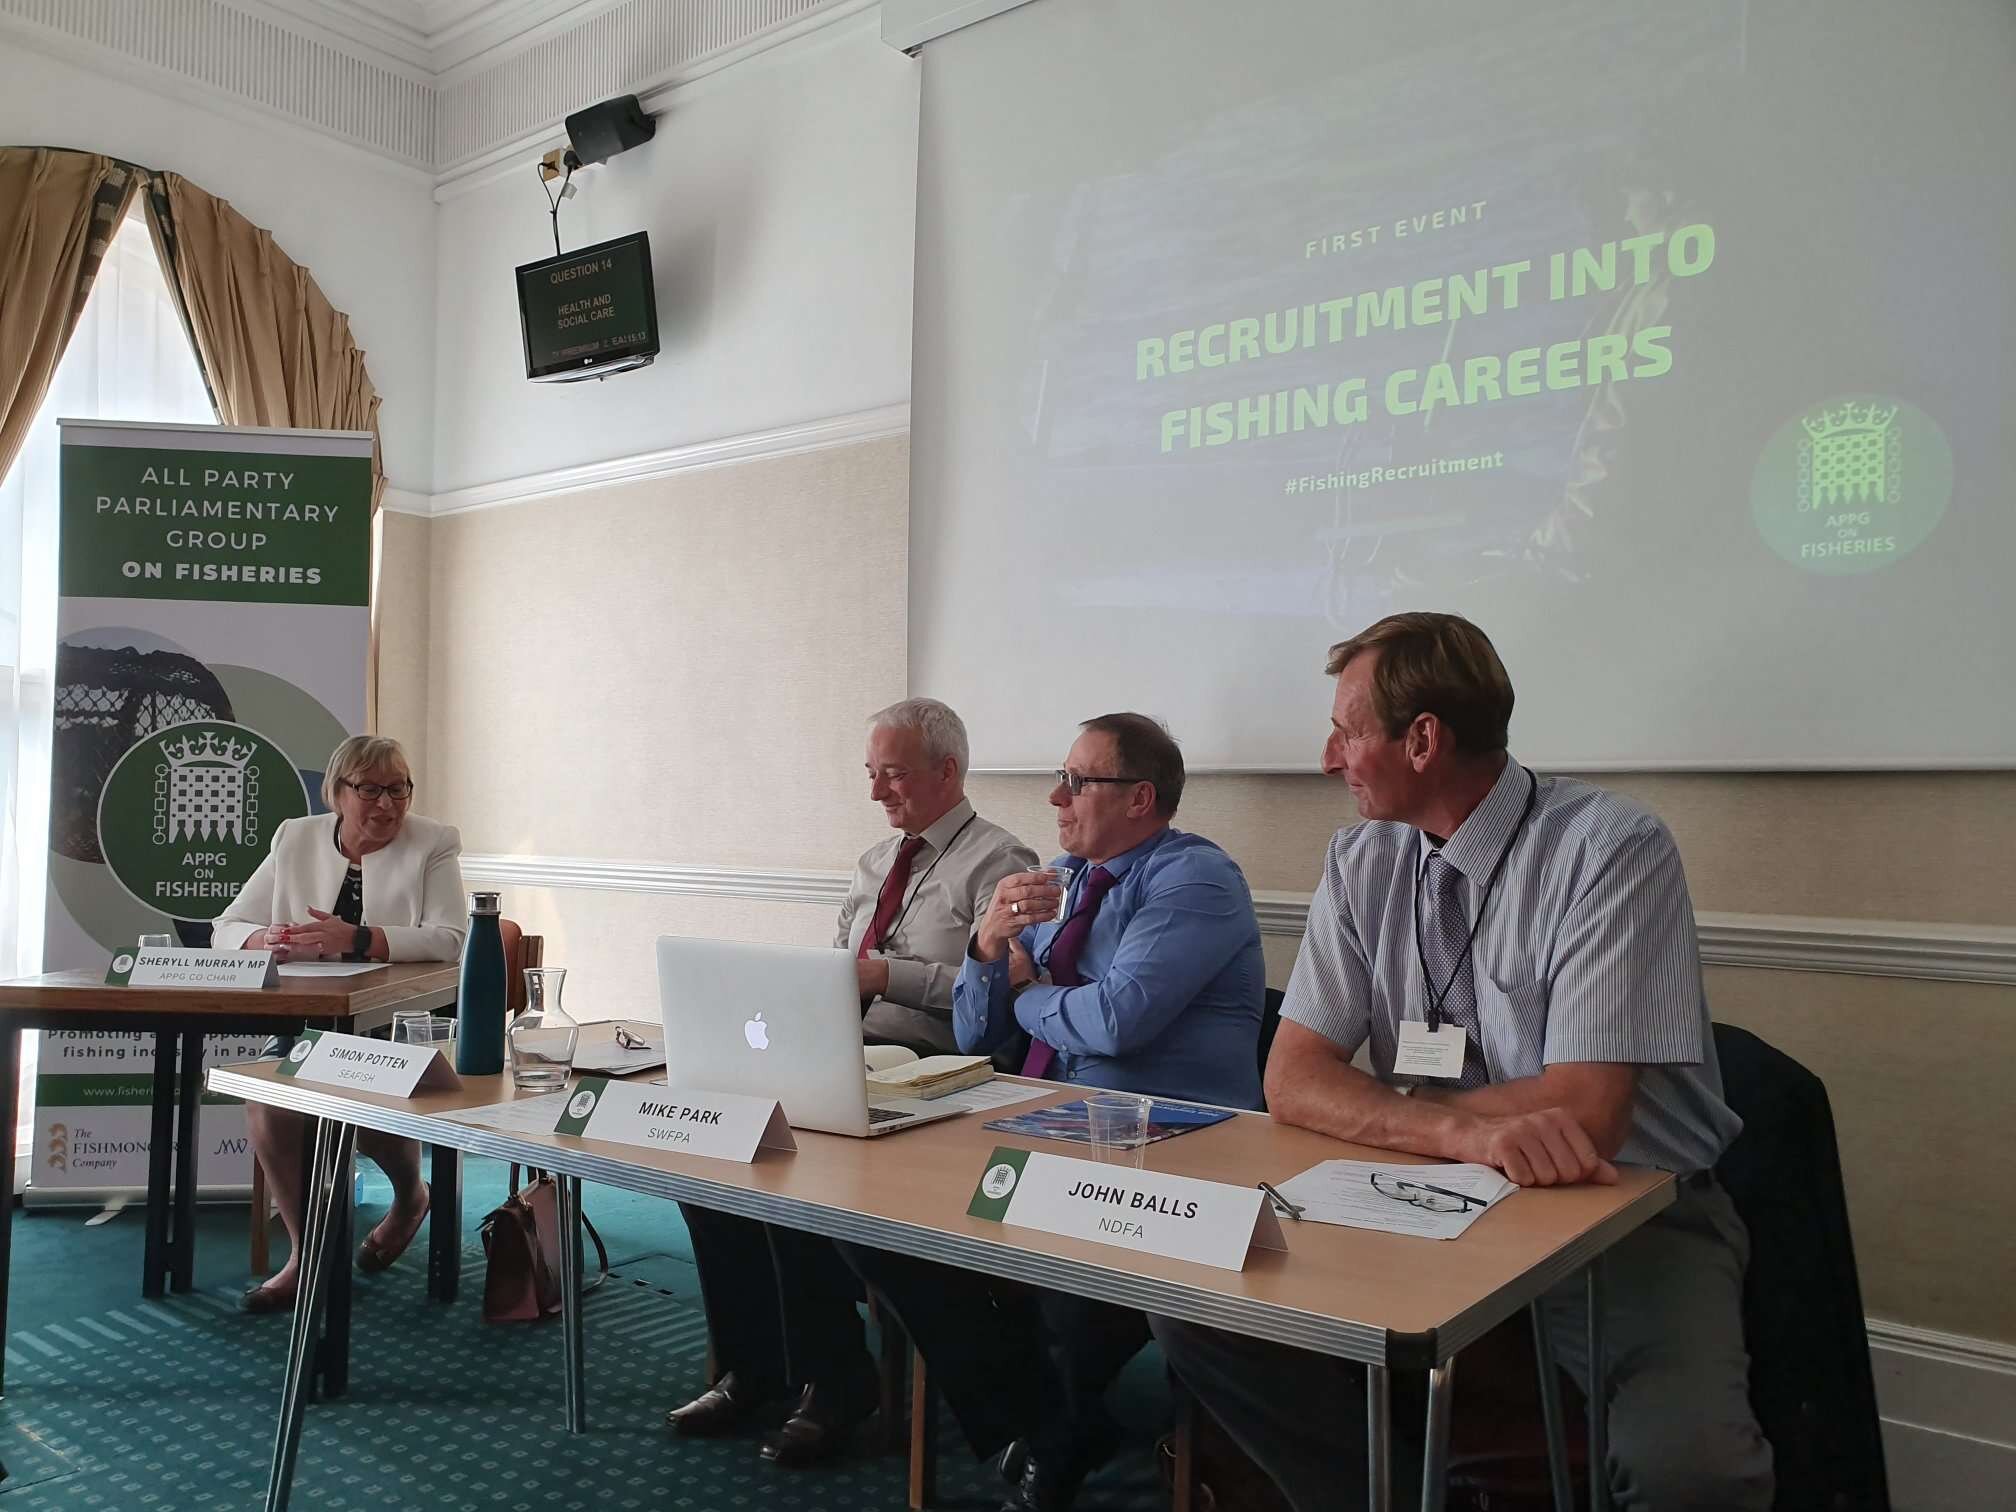 APPG on Fisheries event ‘Recruitment into fishing careers’ led by MP Sheryll Murray, with Simon Potten, Mike Park, and John Balls on the panel.